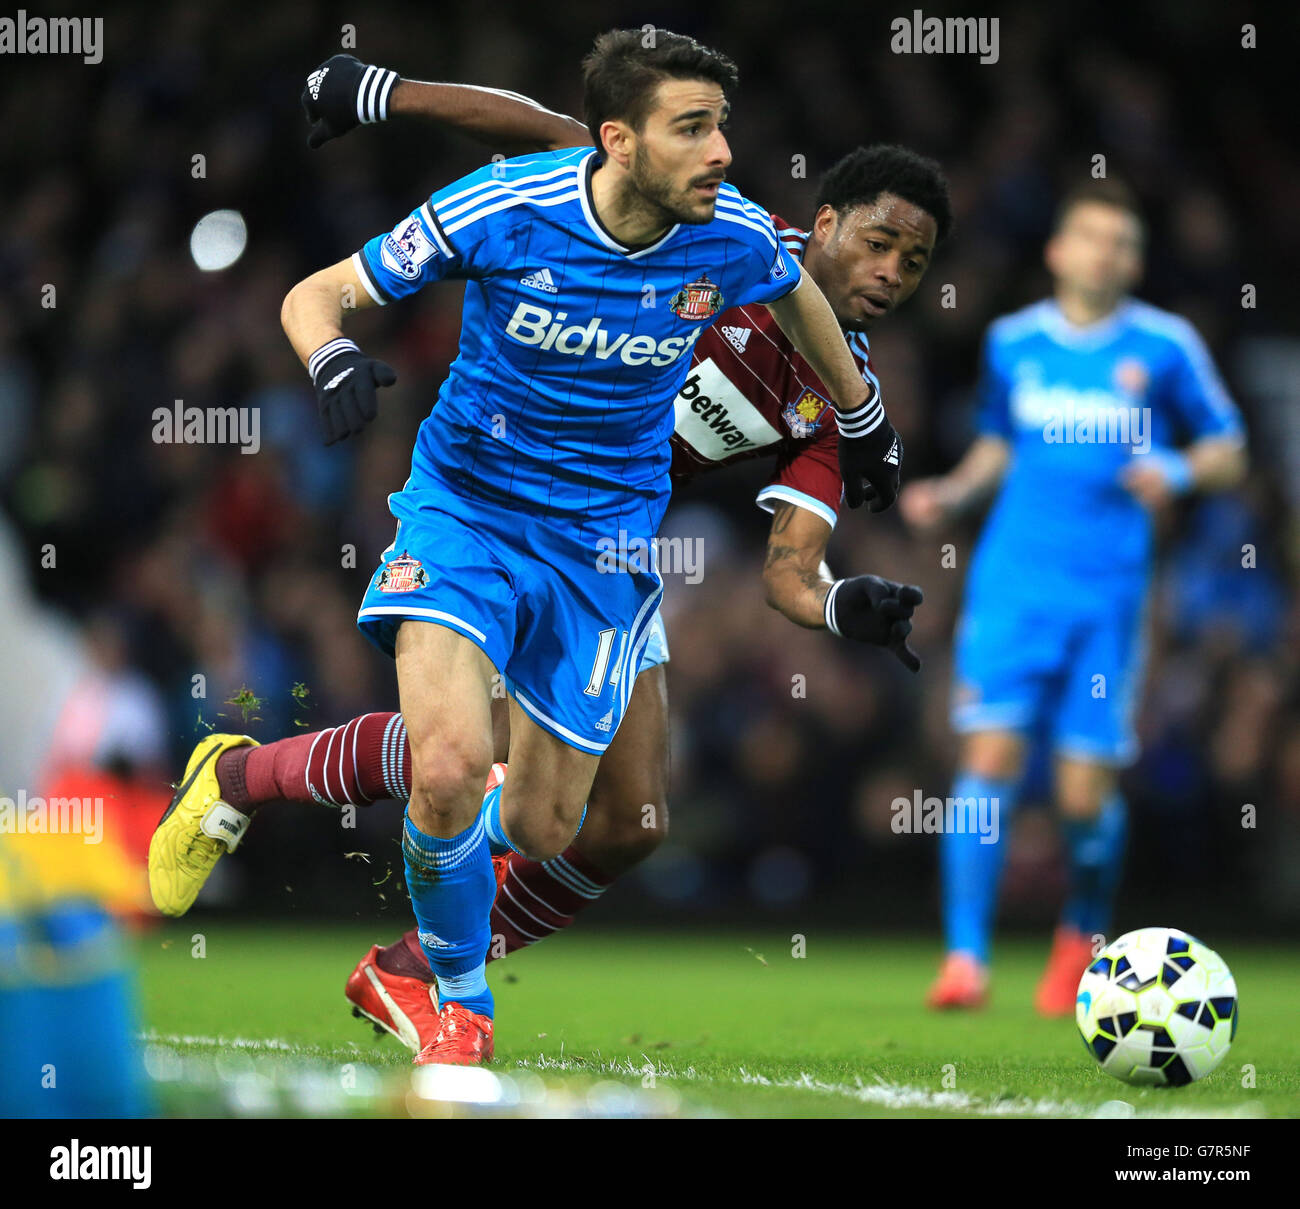 West Ham United's Alex Song (right) and Sunderland's Jordi Gomez battle for the ball during the Barclays Premier League match at Upton Park, London. Stock Photo